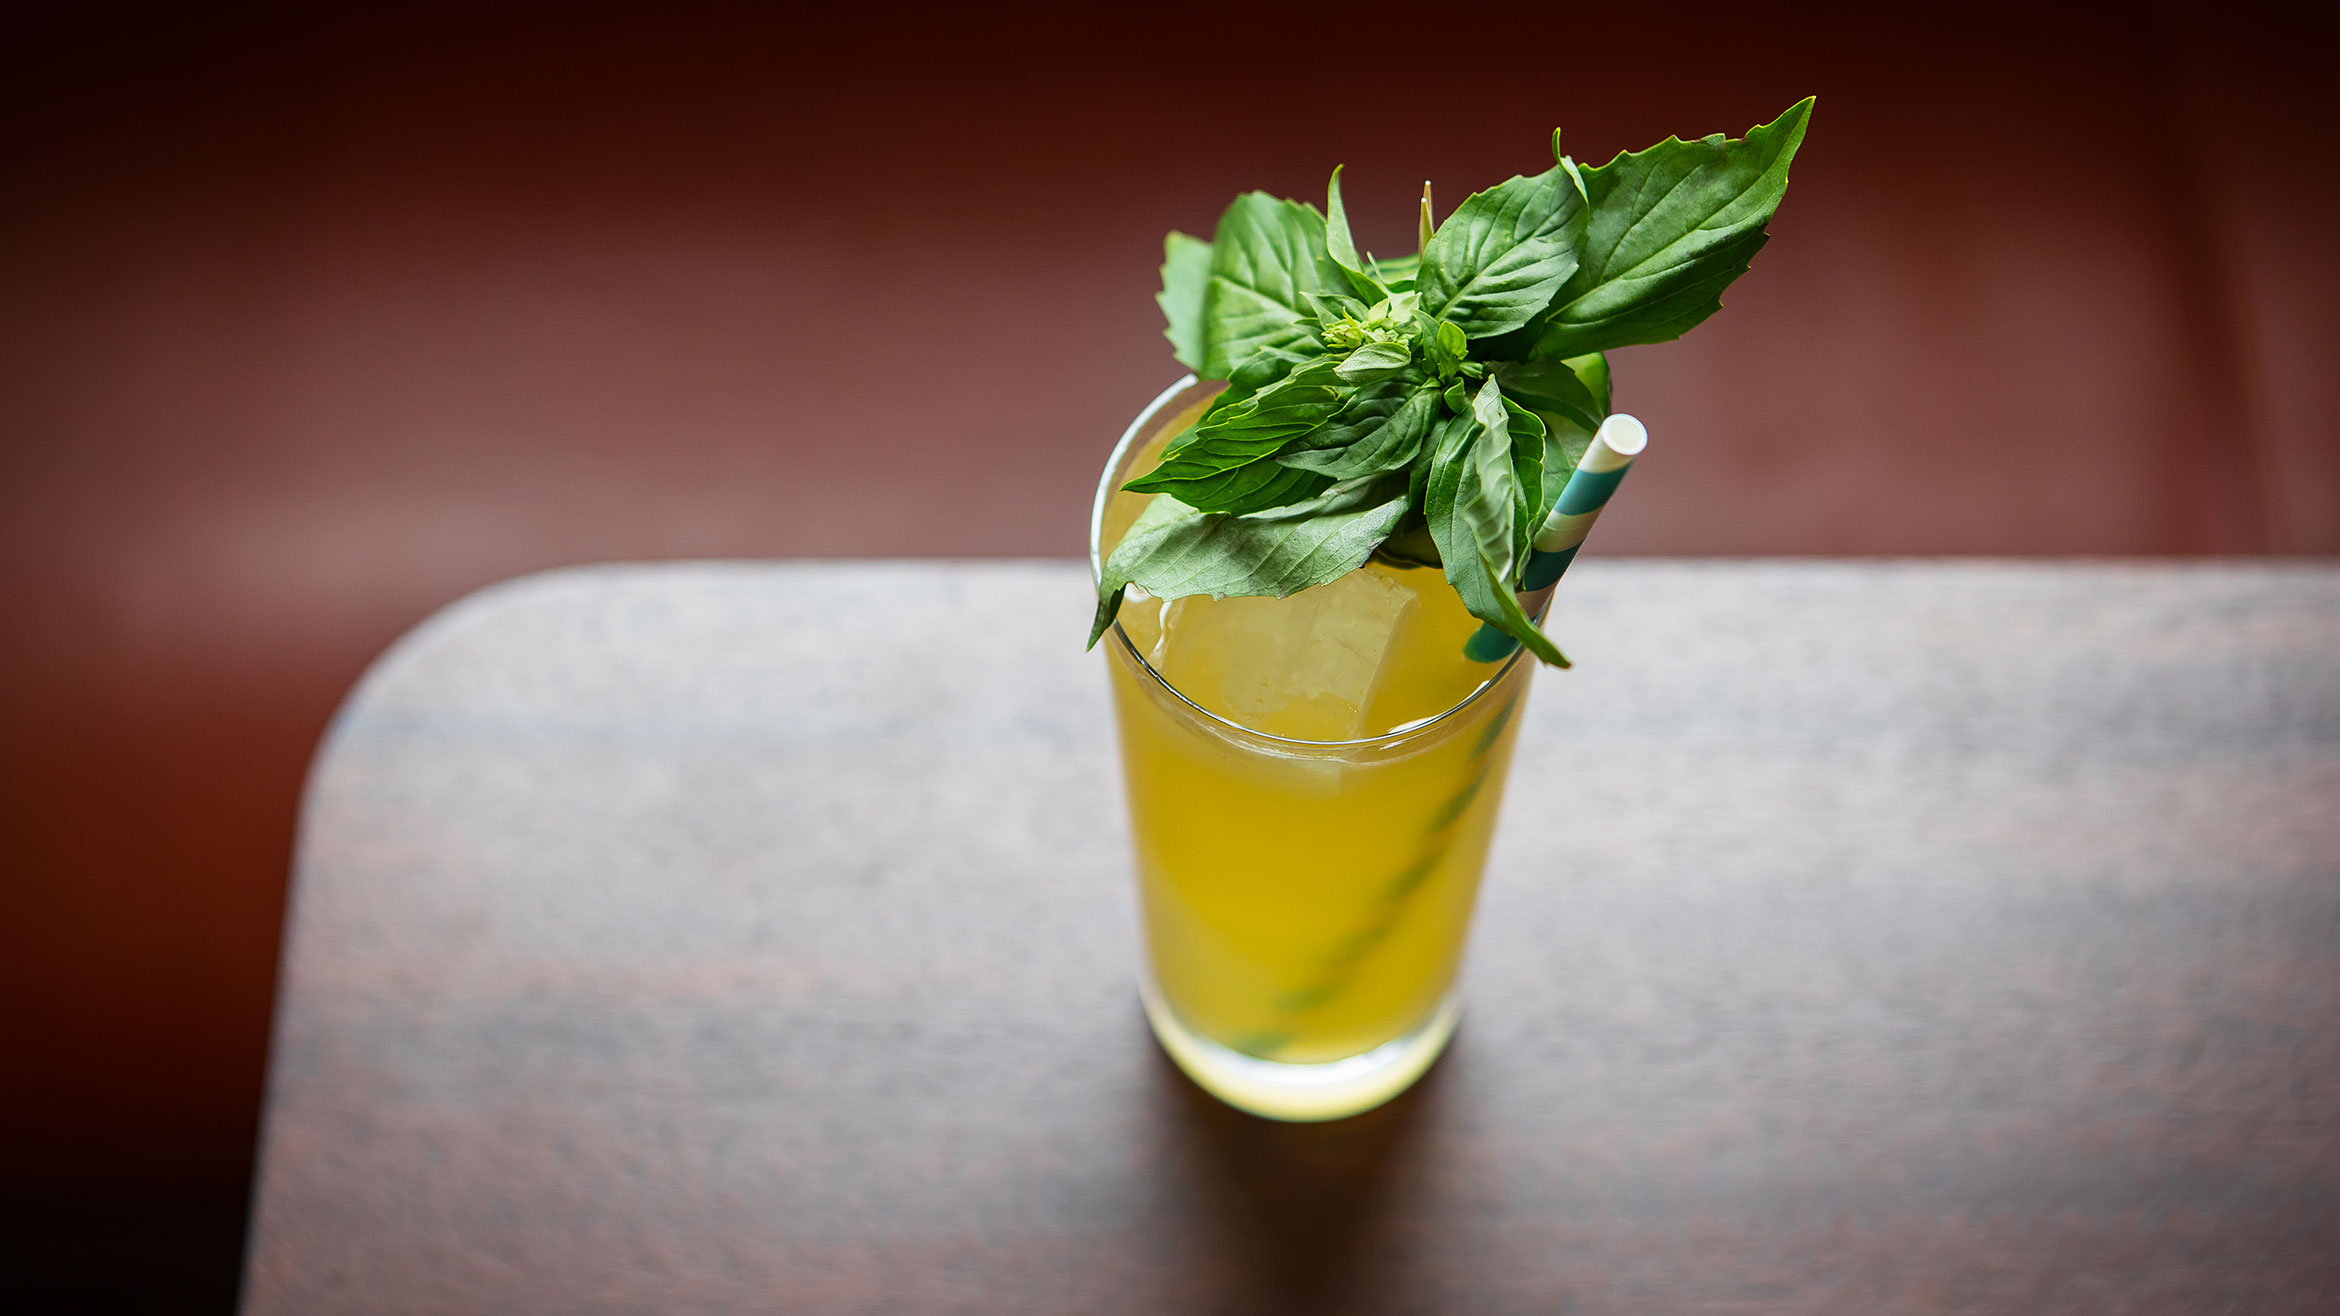 A yellow beverage in a tall glass with mint garnich and paper straw.